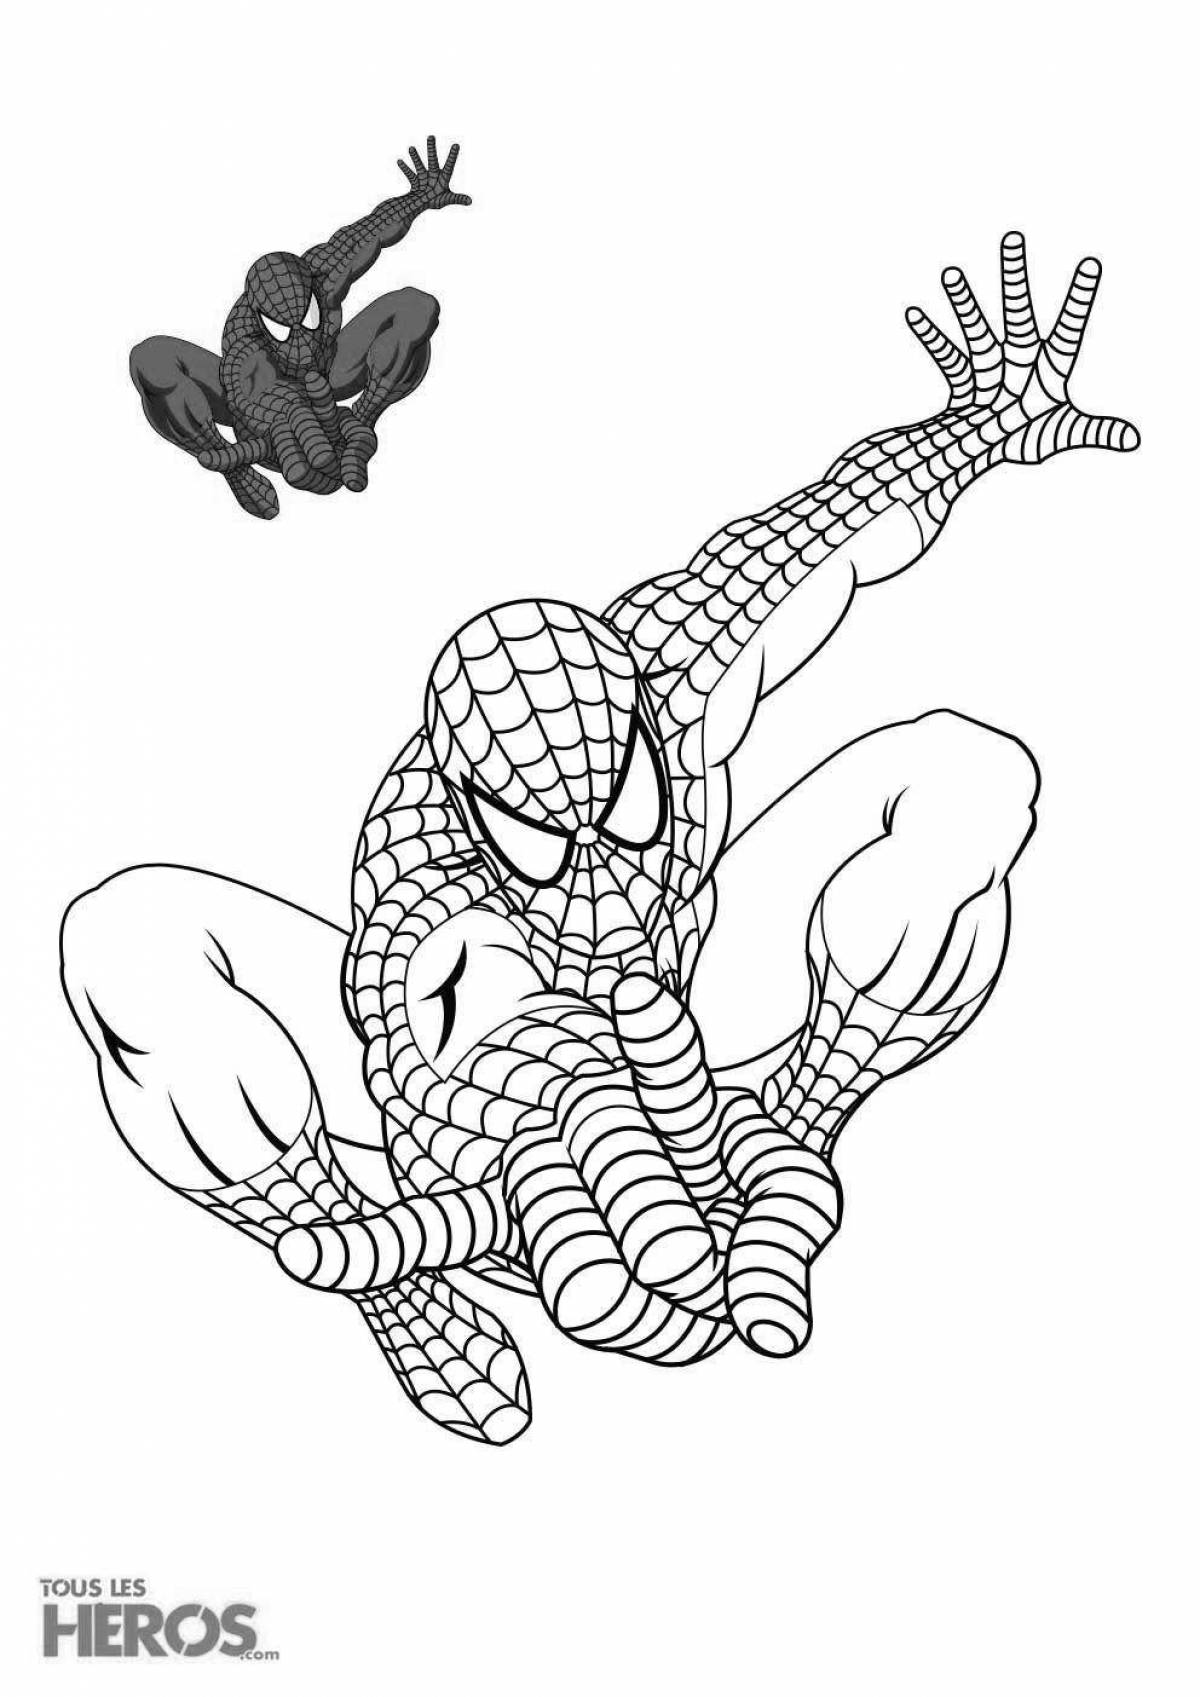 Jazzy new year spider-man coloring book